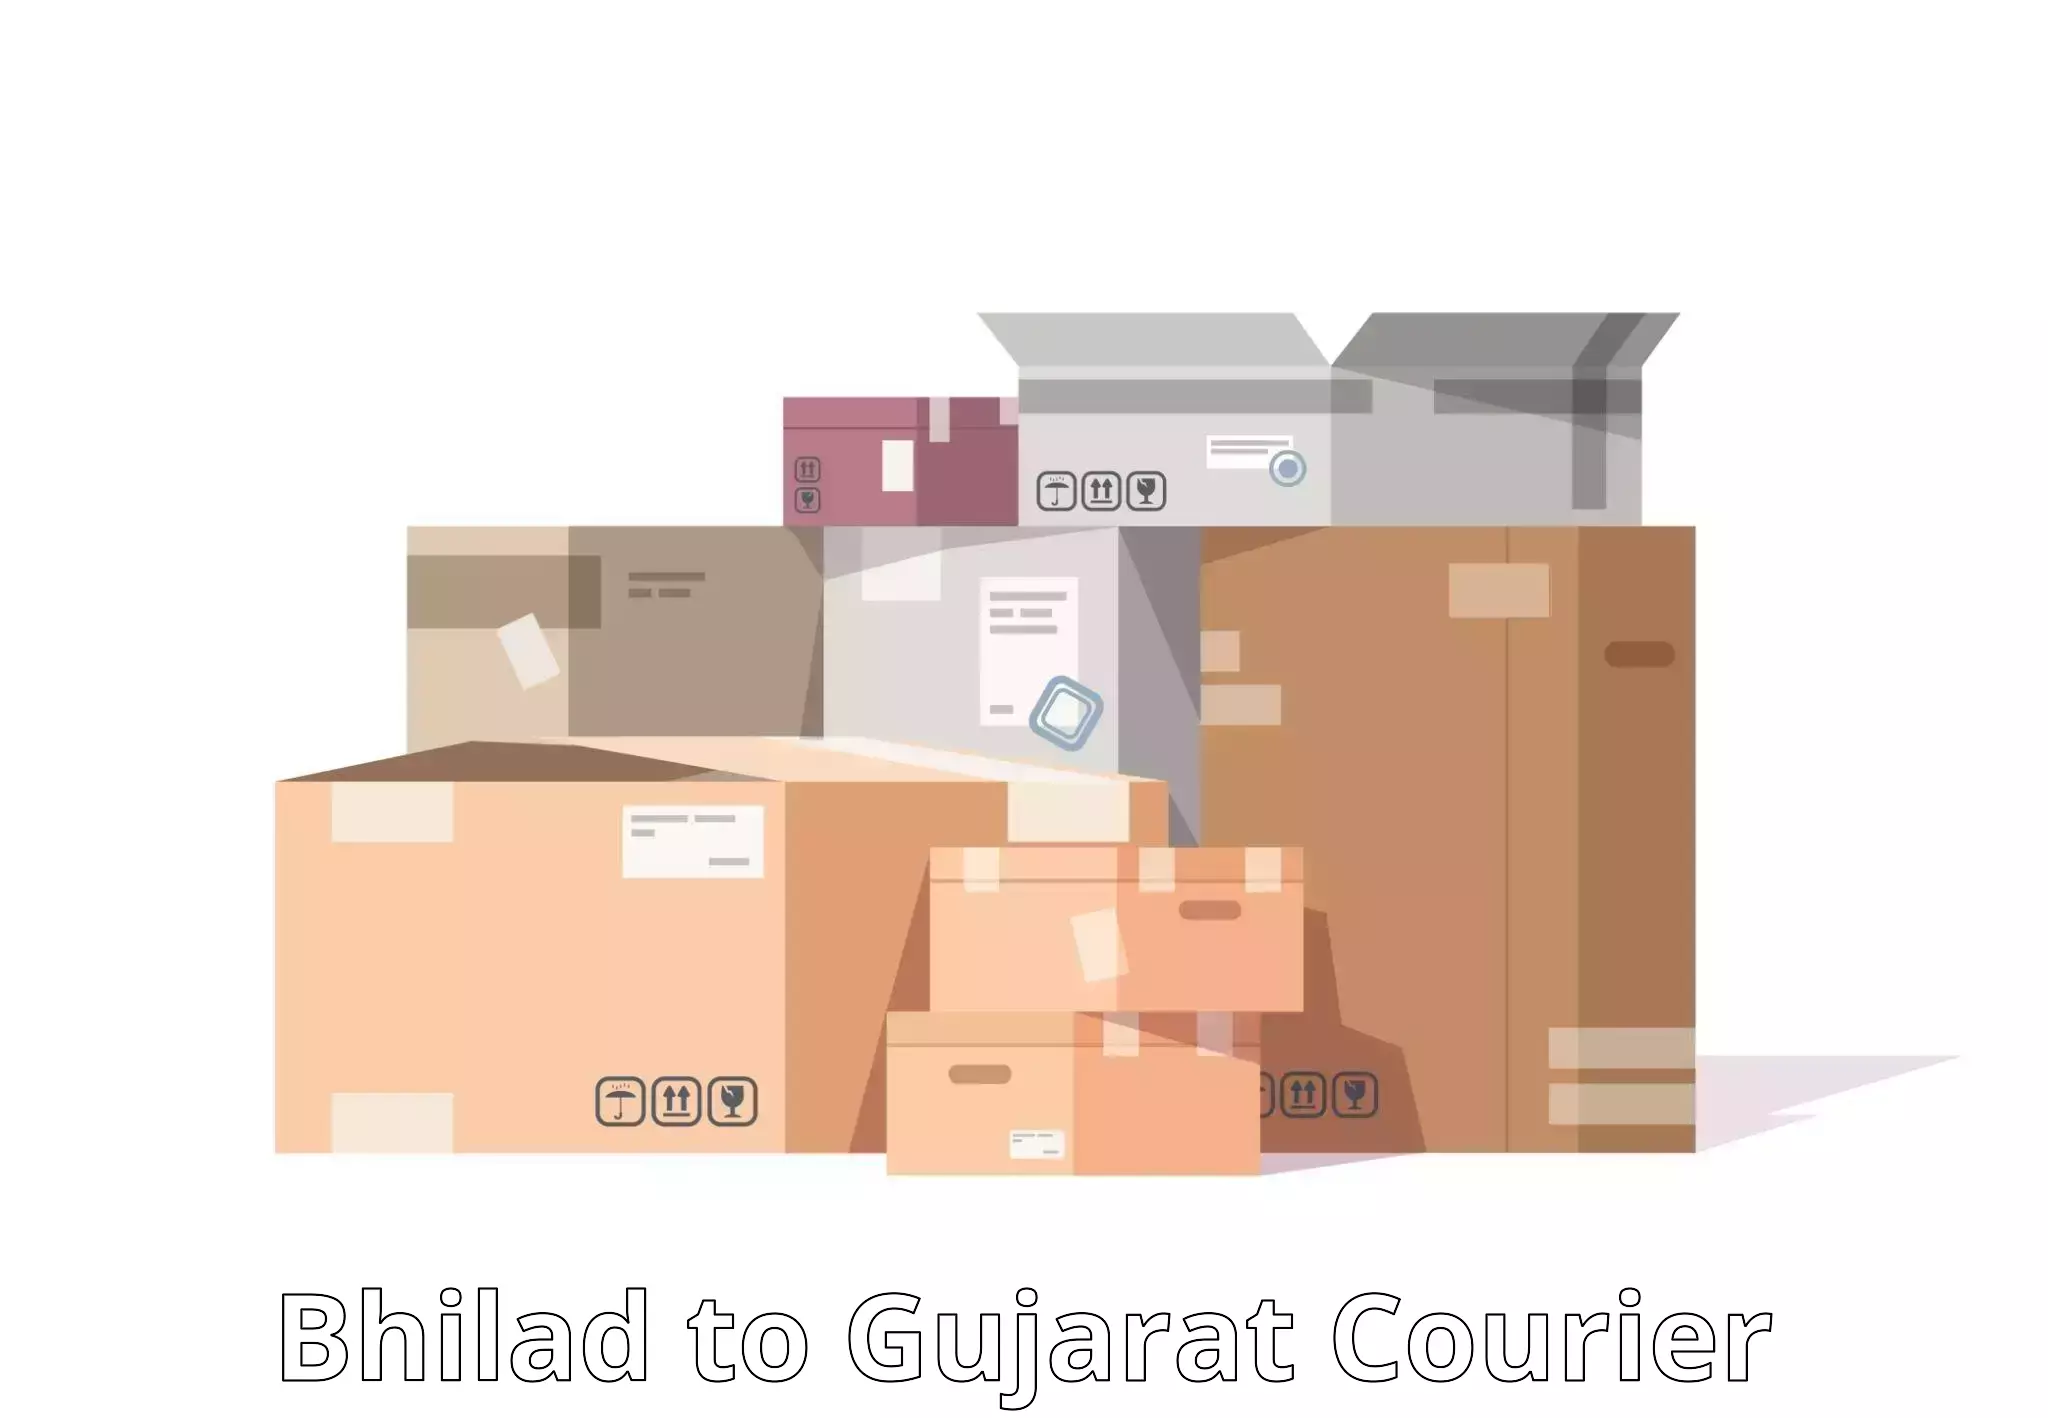 Comprehensive shipping network Bhilad to Mehsana